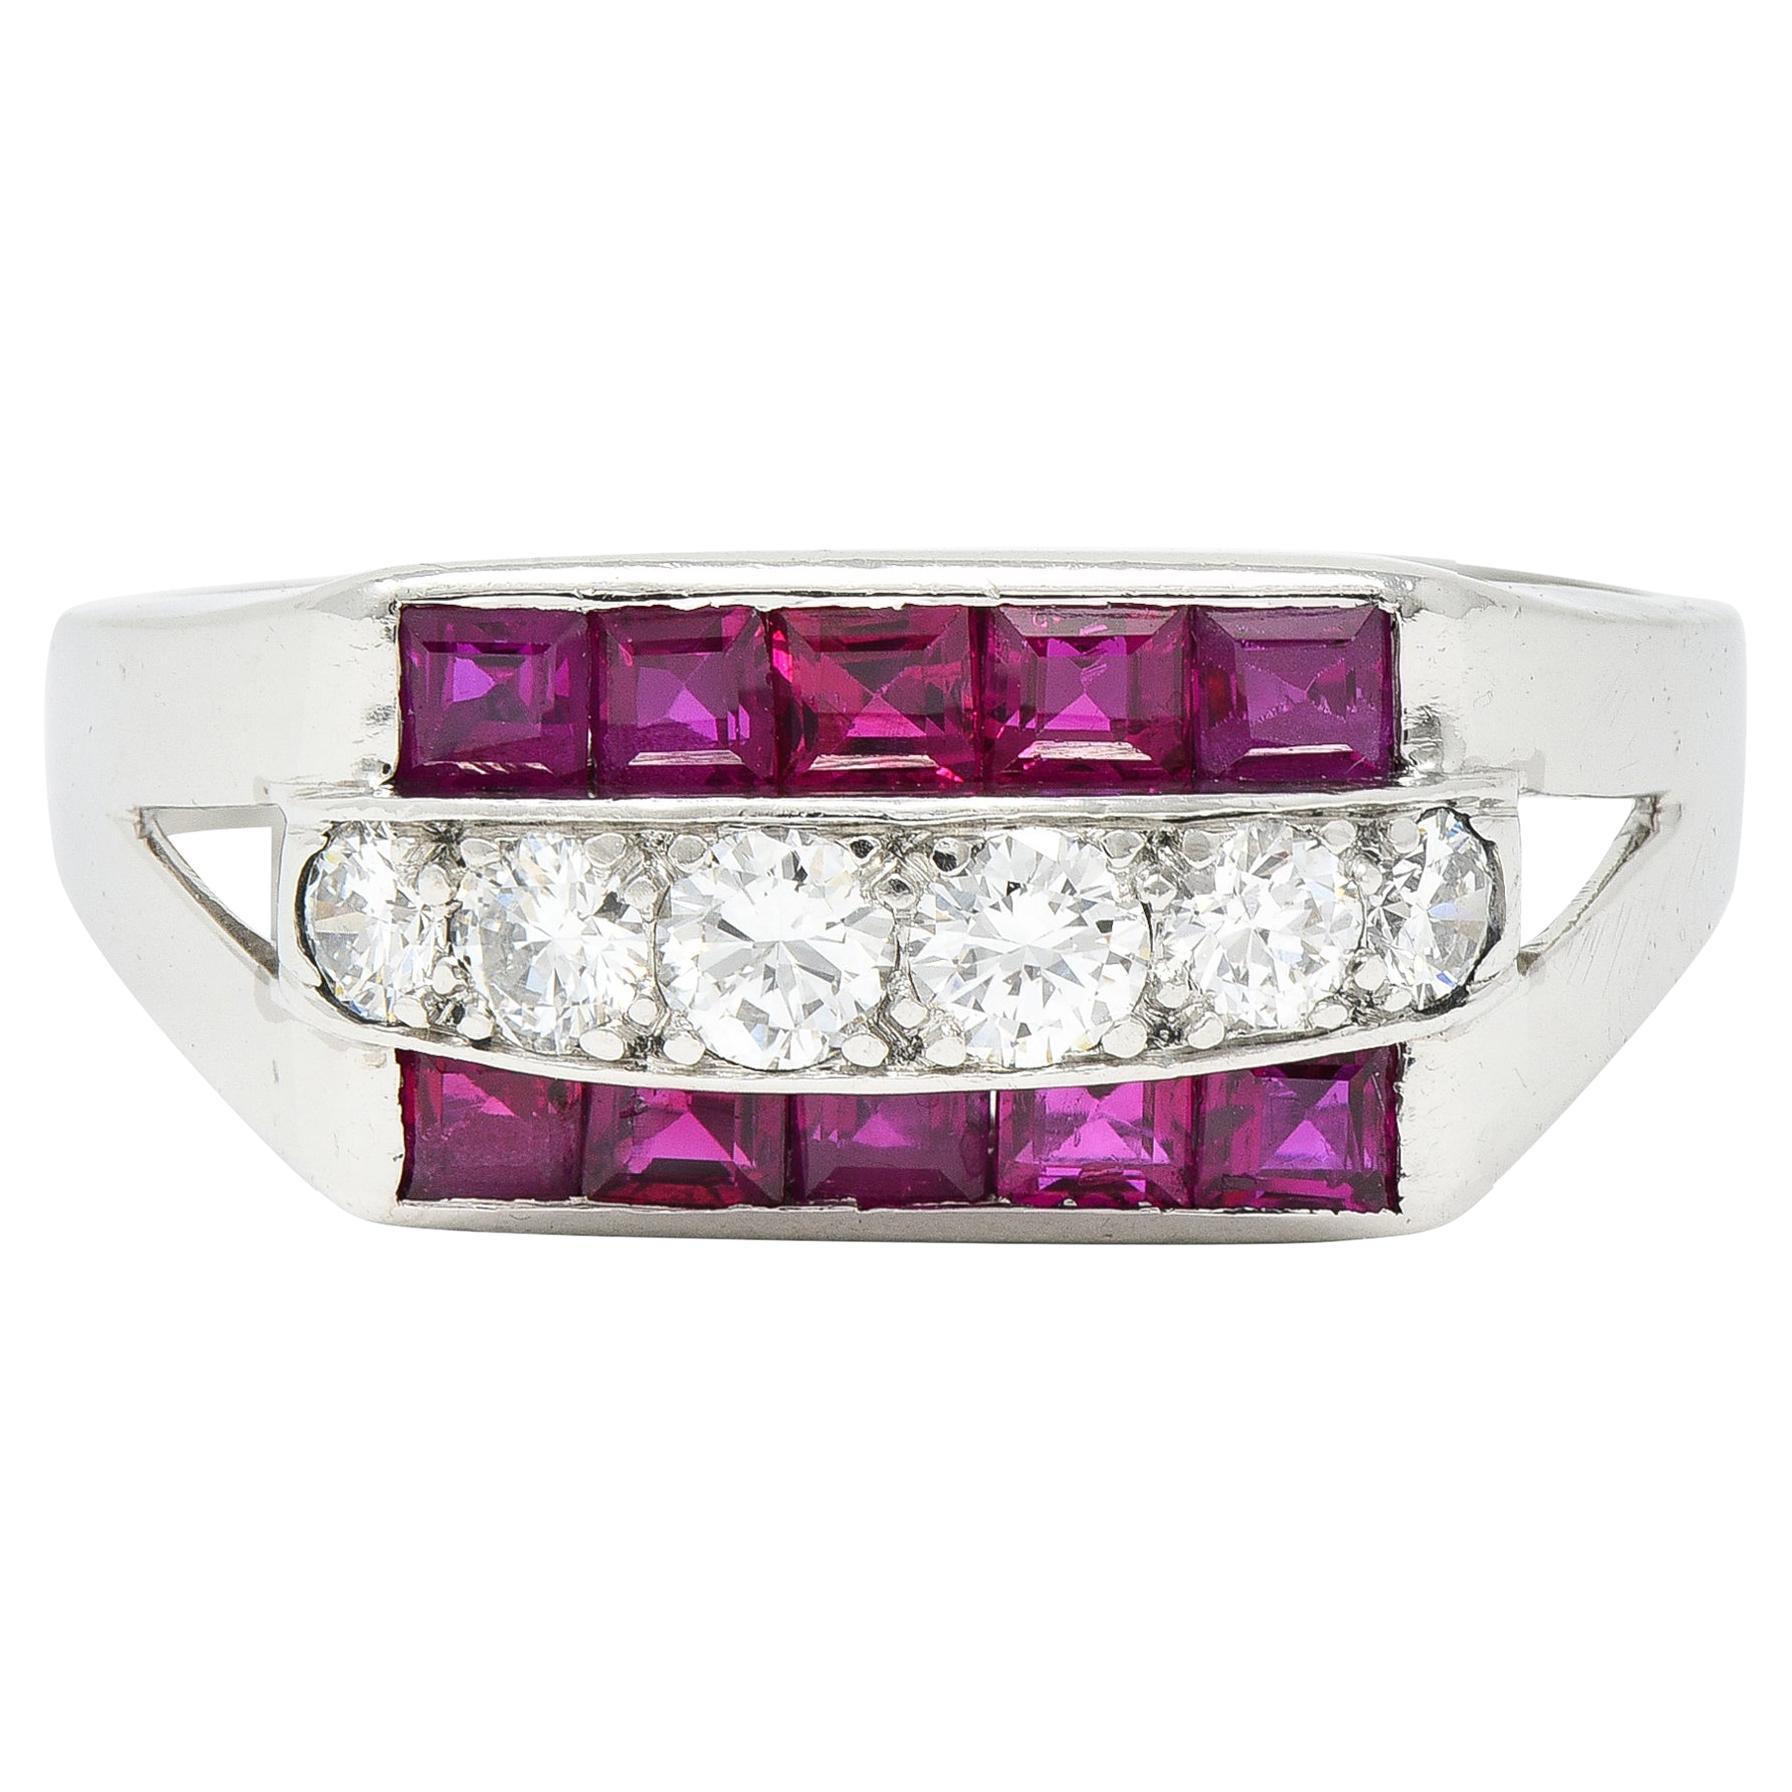 1950's Mid-Century 1.05 CTW Ruby Diamond Platinum Band Ring For Sale